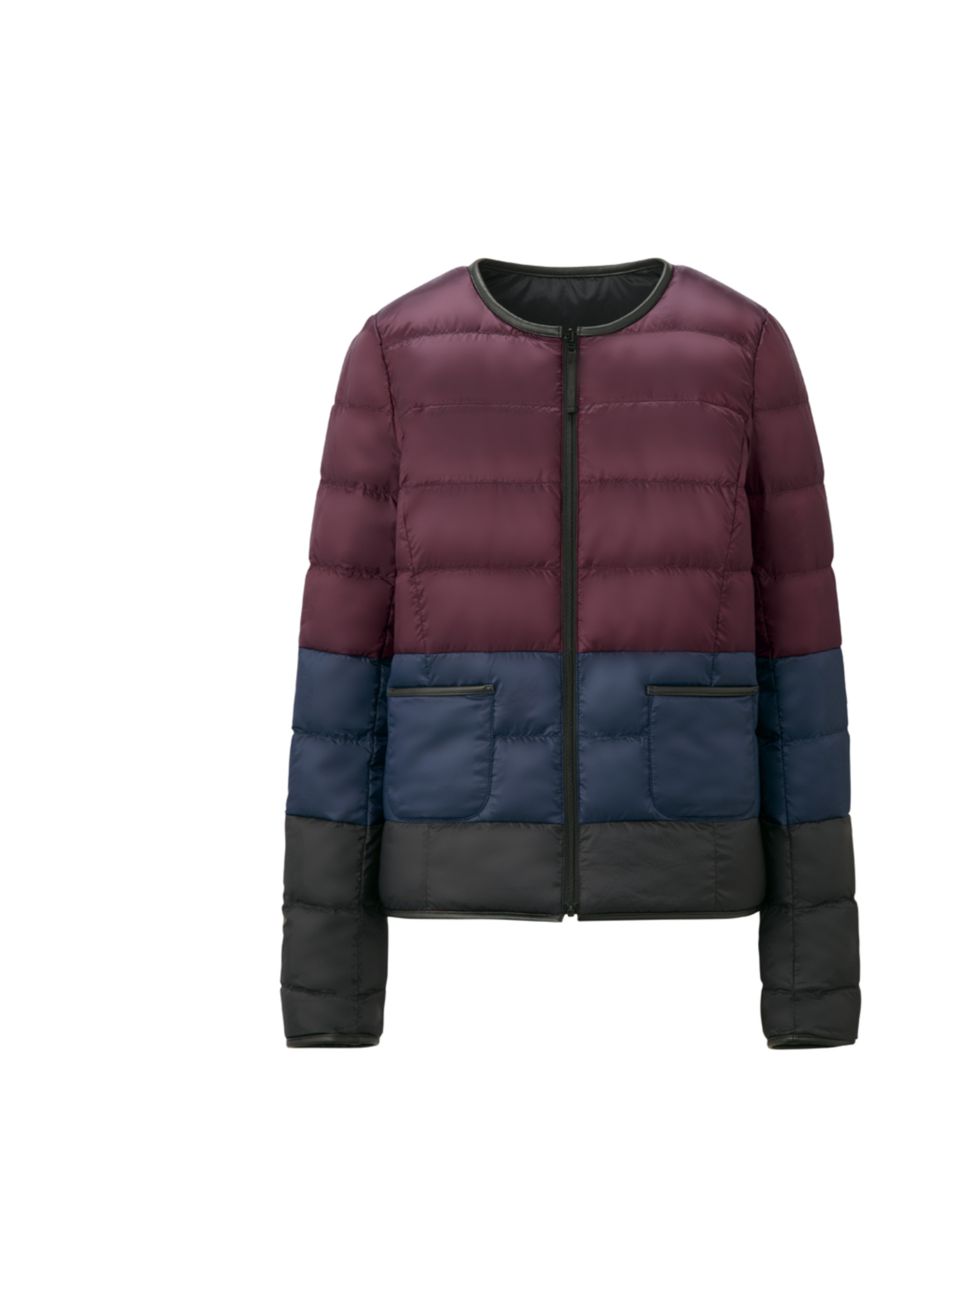 <p>The puffa jacket? You bet. It was the catwalk trend that took us all by surprise and thanks to Uniqlo you can get in on the action with a high street price tag <a href="http://shop.uniqlo.com/uk/goods/075003">Uniqlo</a> quilted down jacket, £89.90</p>